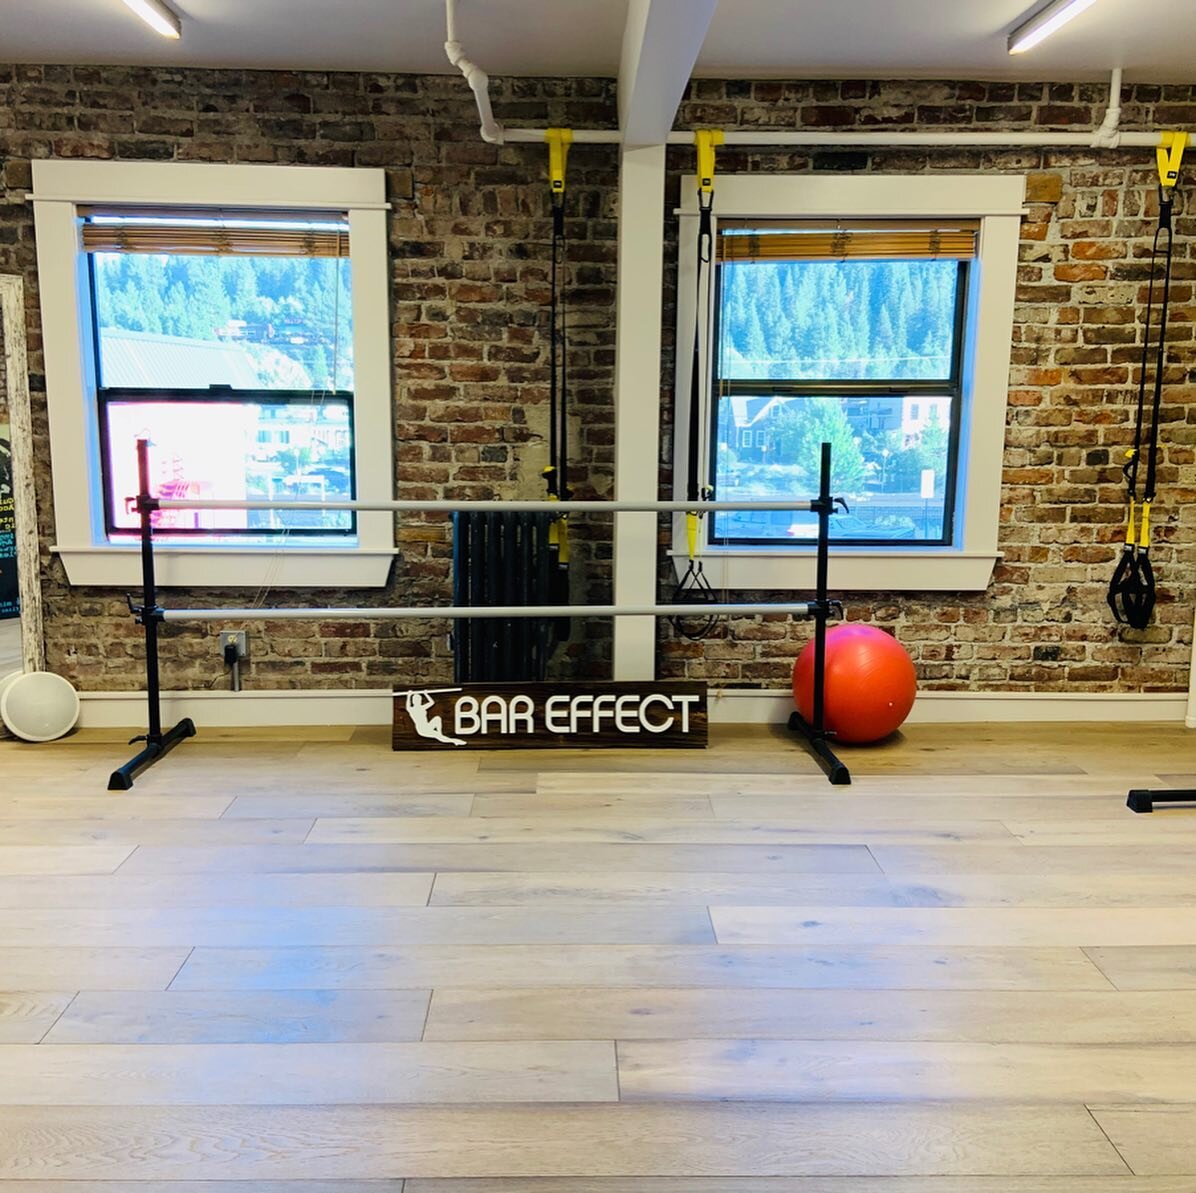 We have moved! 

Our NEW location in Downtown Truckee (Hotel Rex) with @truckeelove is OPEN

The Bar Effect- Pilates has created a NEW individualized approach to health and wellness. 
Focusing on a wholistic style of fitness through NEW movements on 